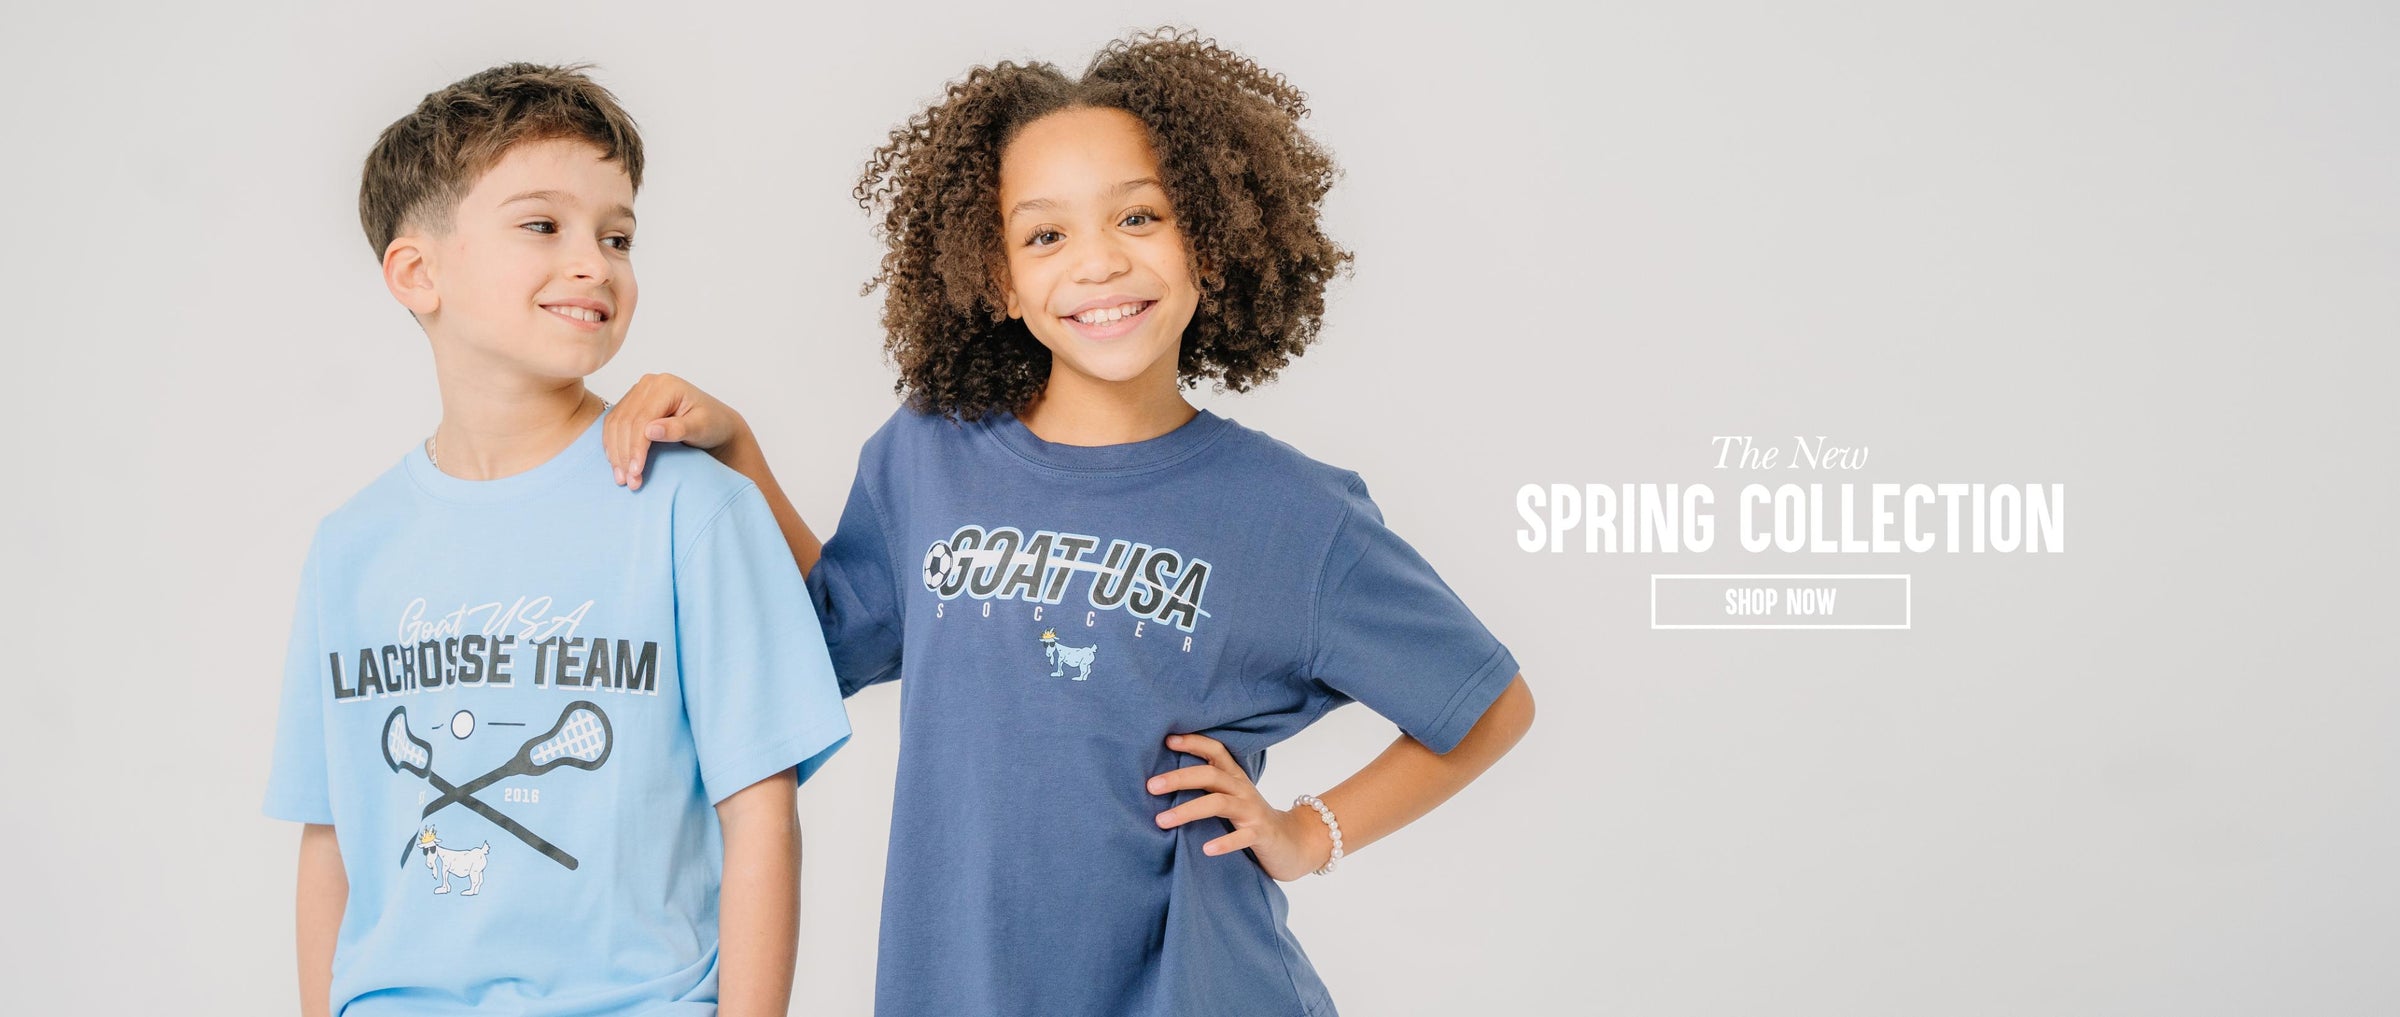 Boy and girl smiling next to text that reads "The New Spring Collection Shop Now"